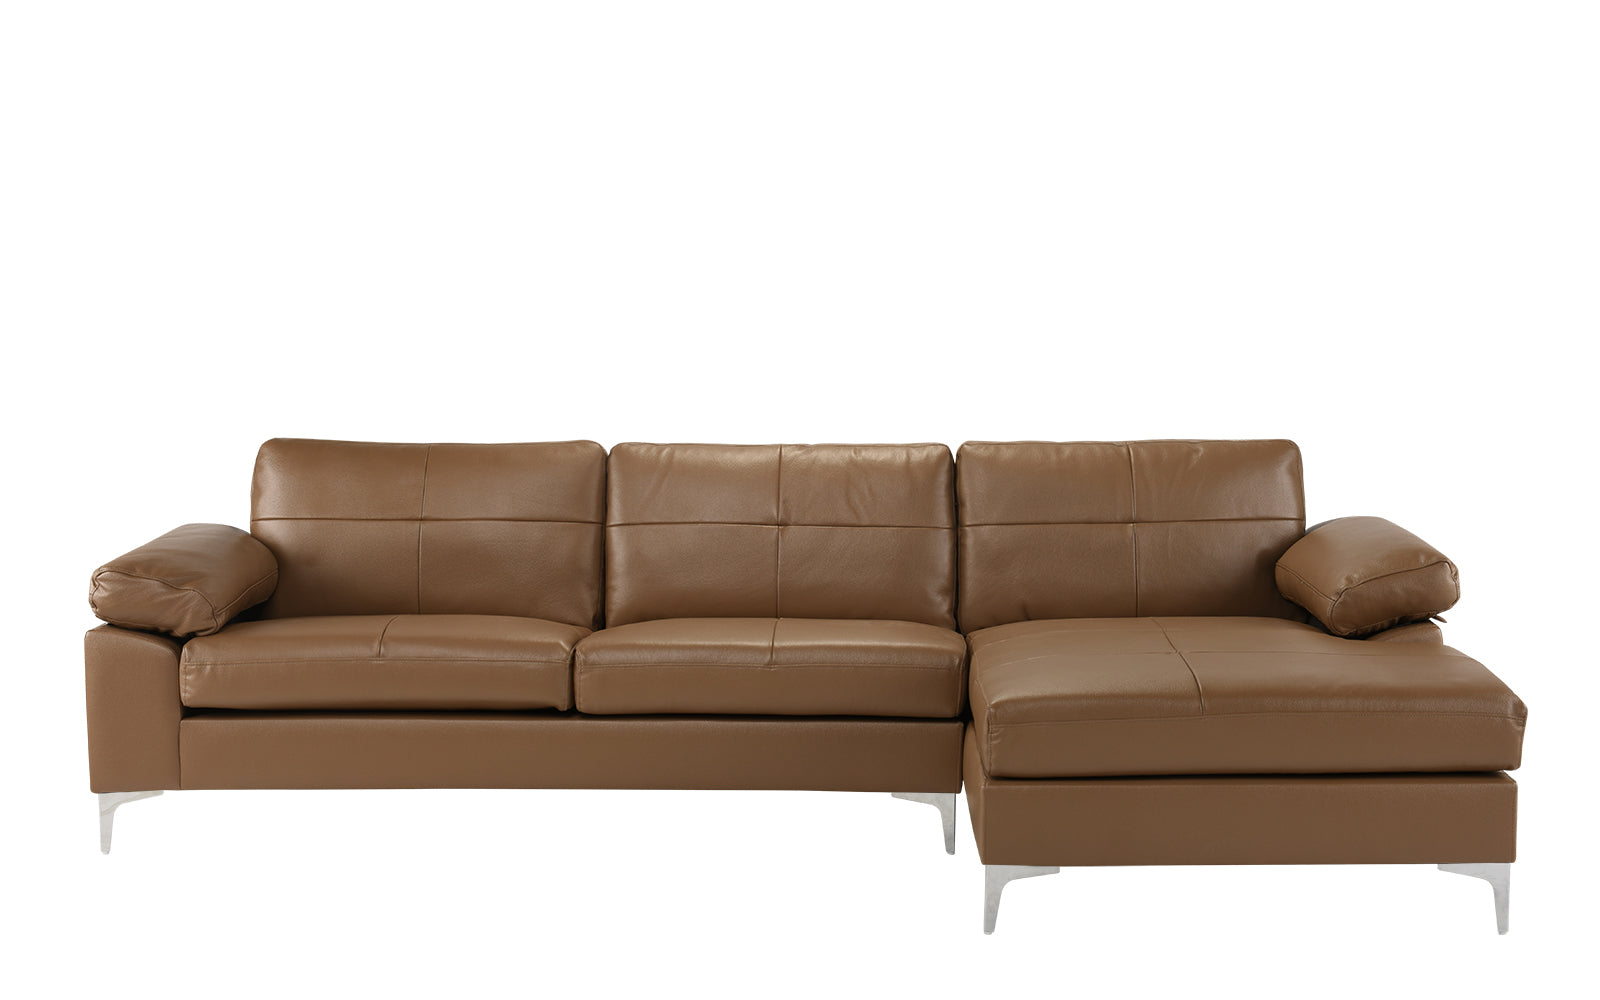 Mai Modern Leather Match Low Profile L-Shape Sectional Sofa with Right Chaise